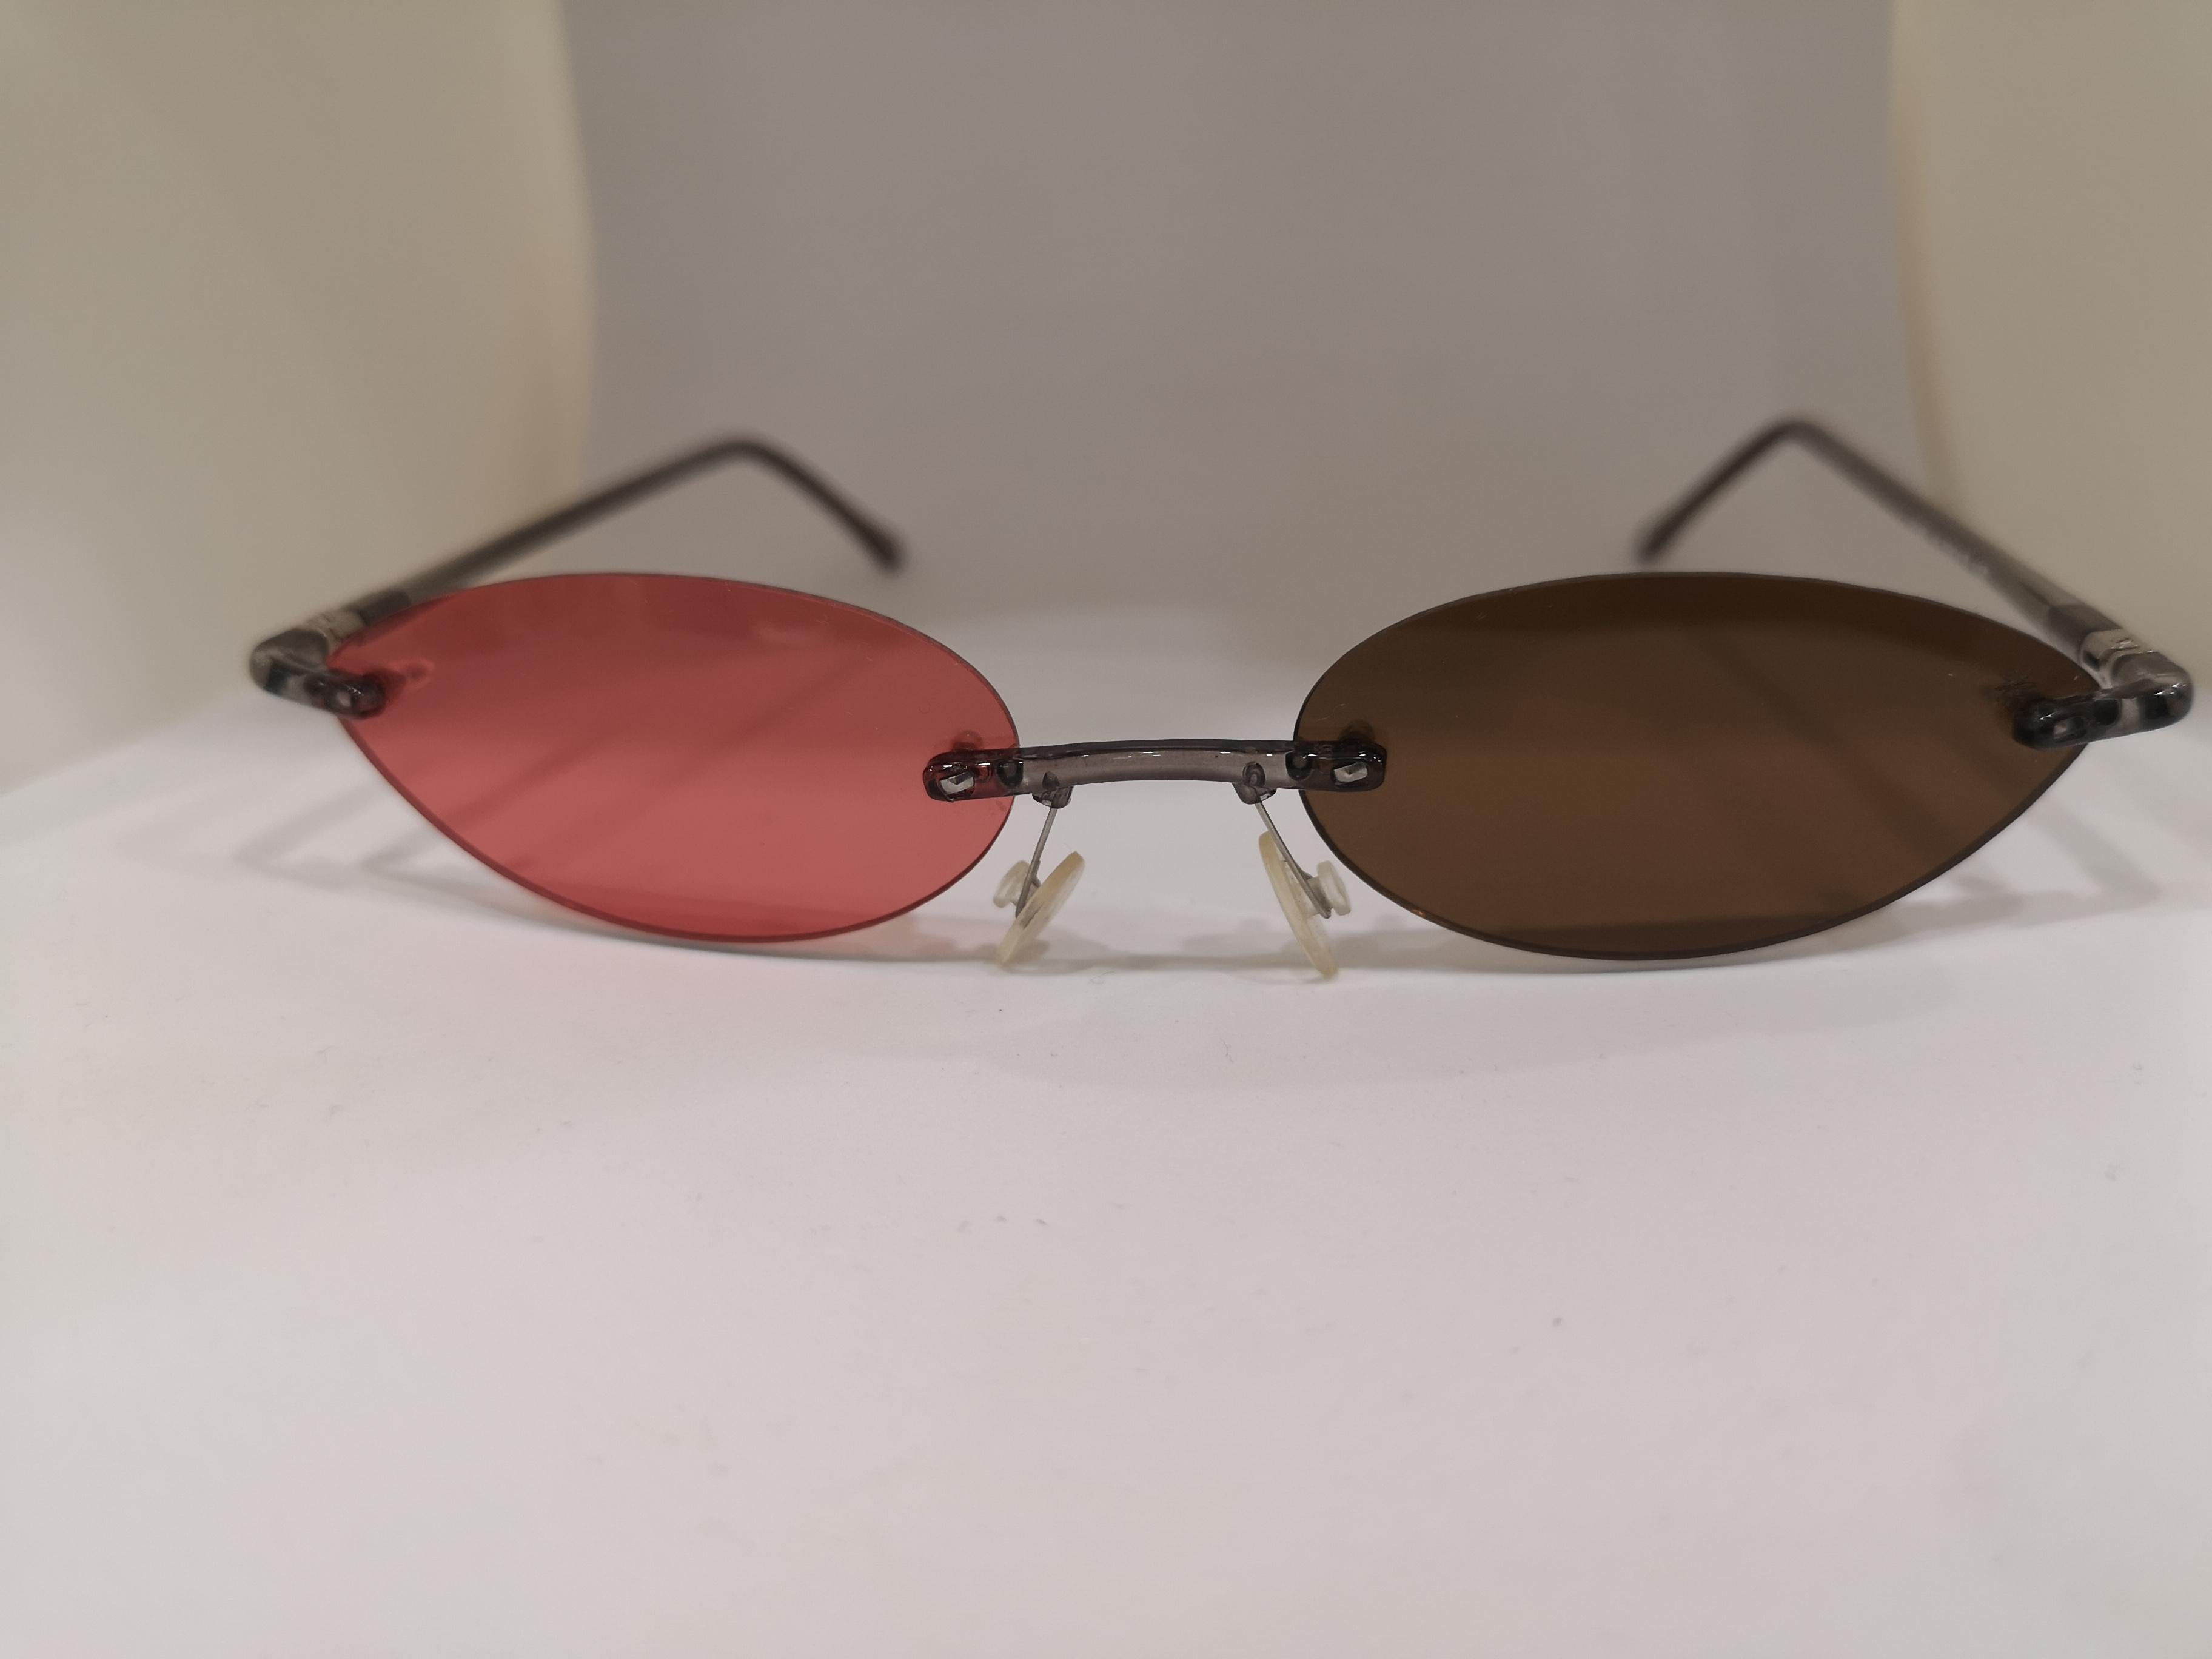 Kommafa brown red lens sunglasses
totally handmade in italy 
unique piece